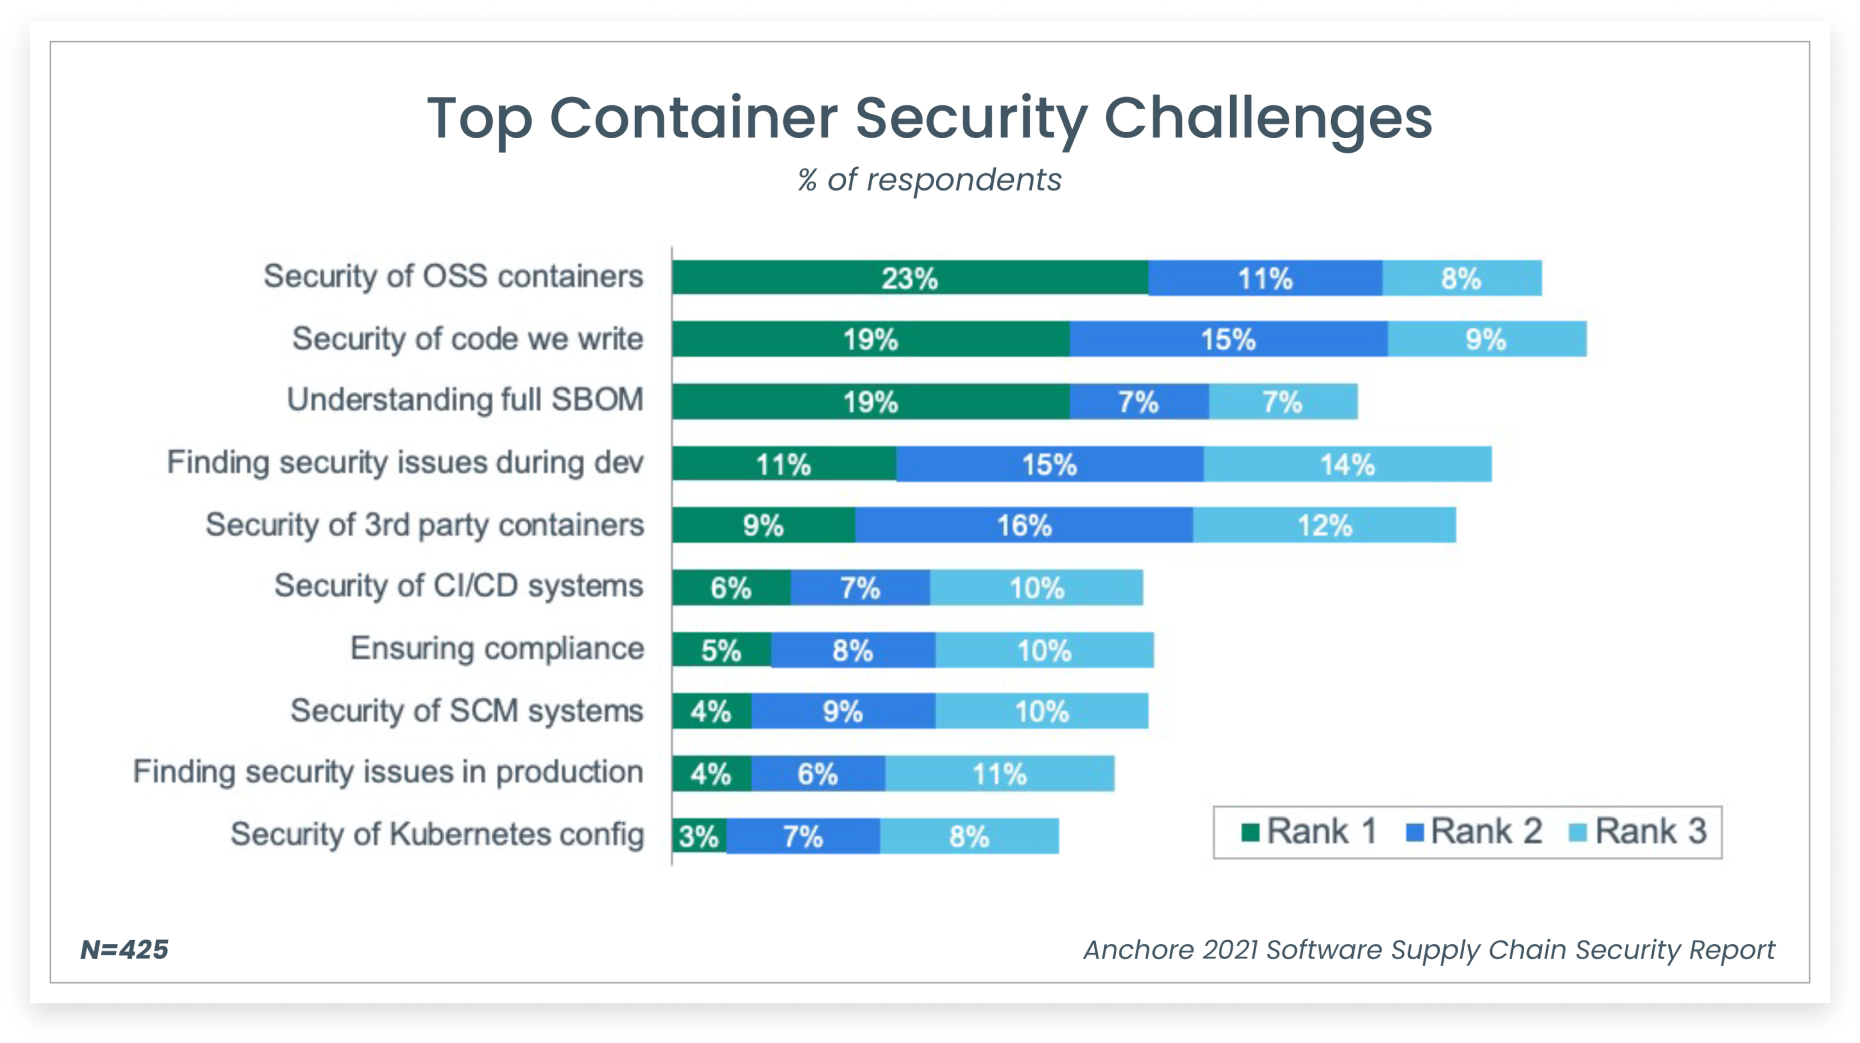 Open Source is the Top Container Security Challenge